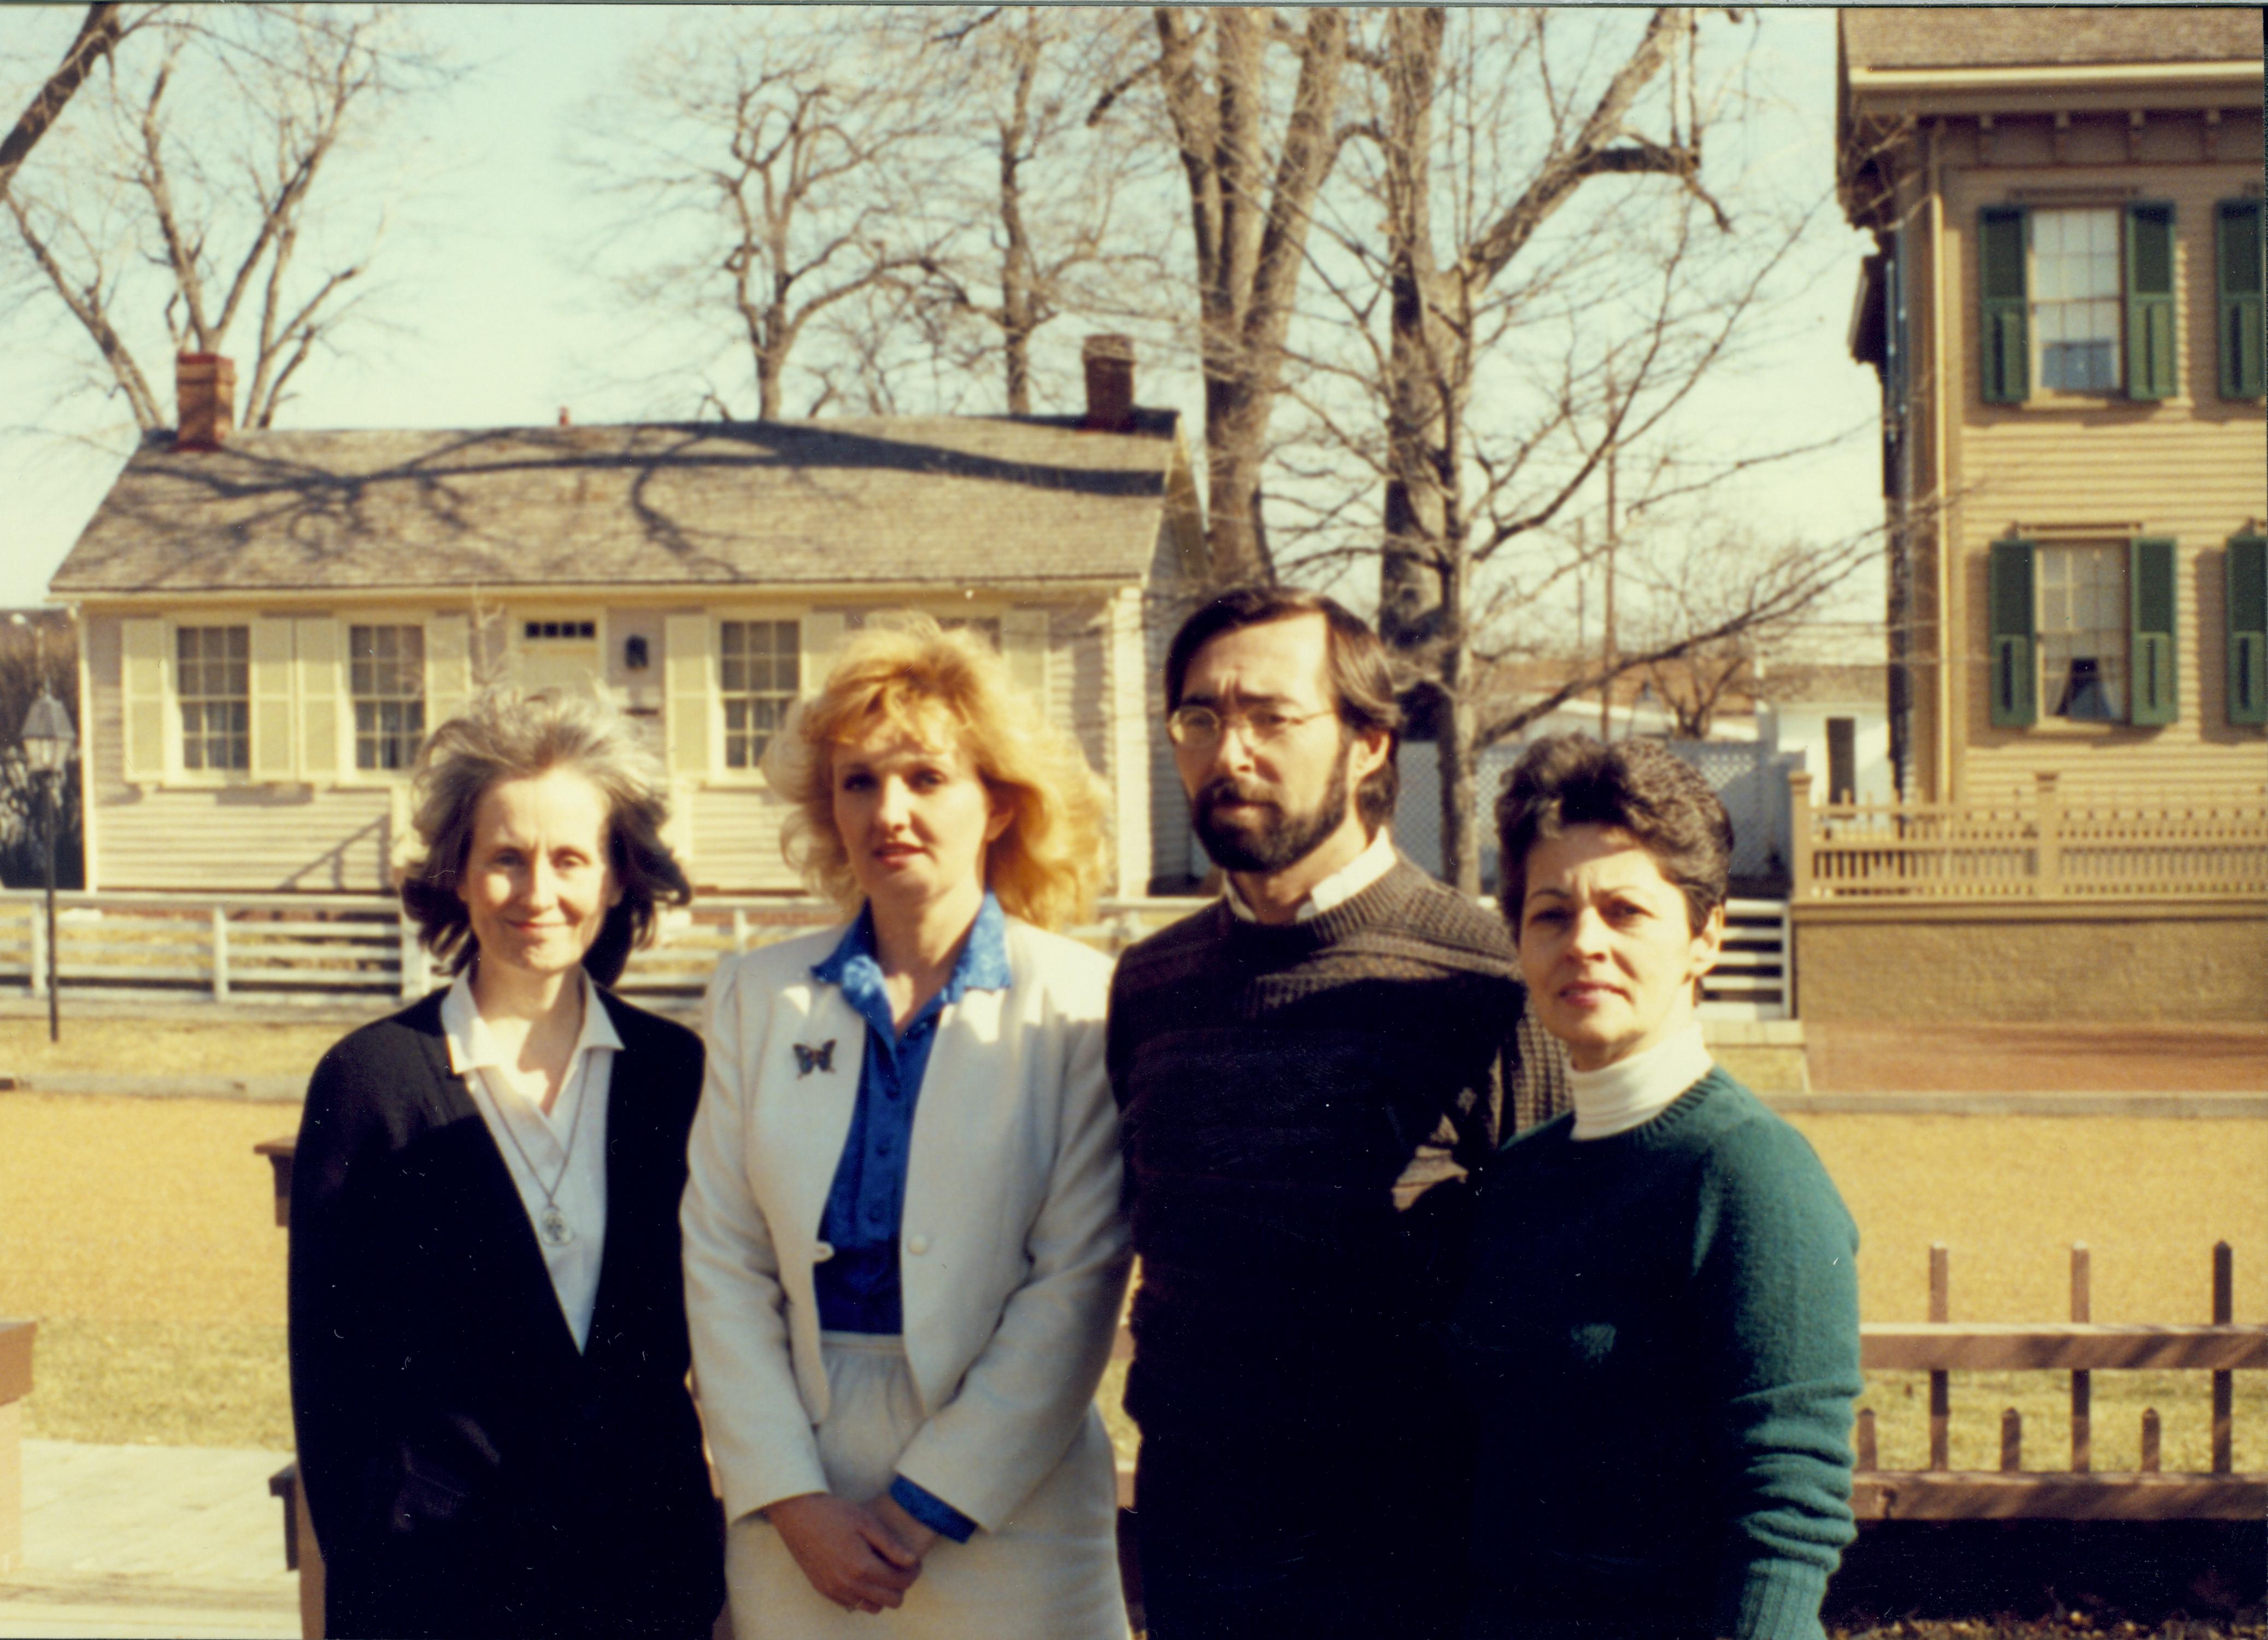 Park Administrative Staff photo in Brown lot Looking east. Corneau House and Lincoln Home in background. From left to right: Nancy Hudson, ?, Fran Krupka, Rena Lowder.